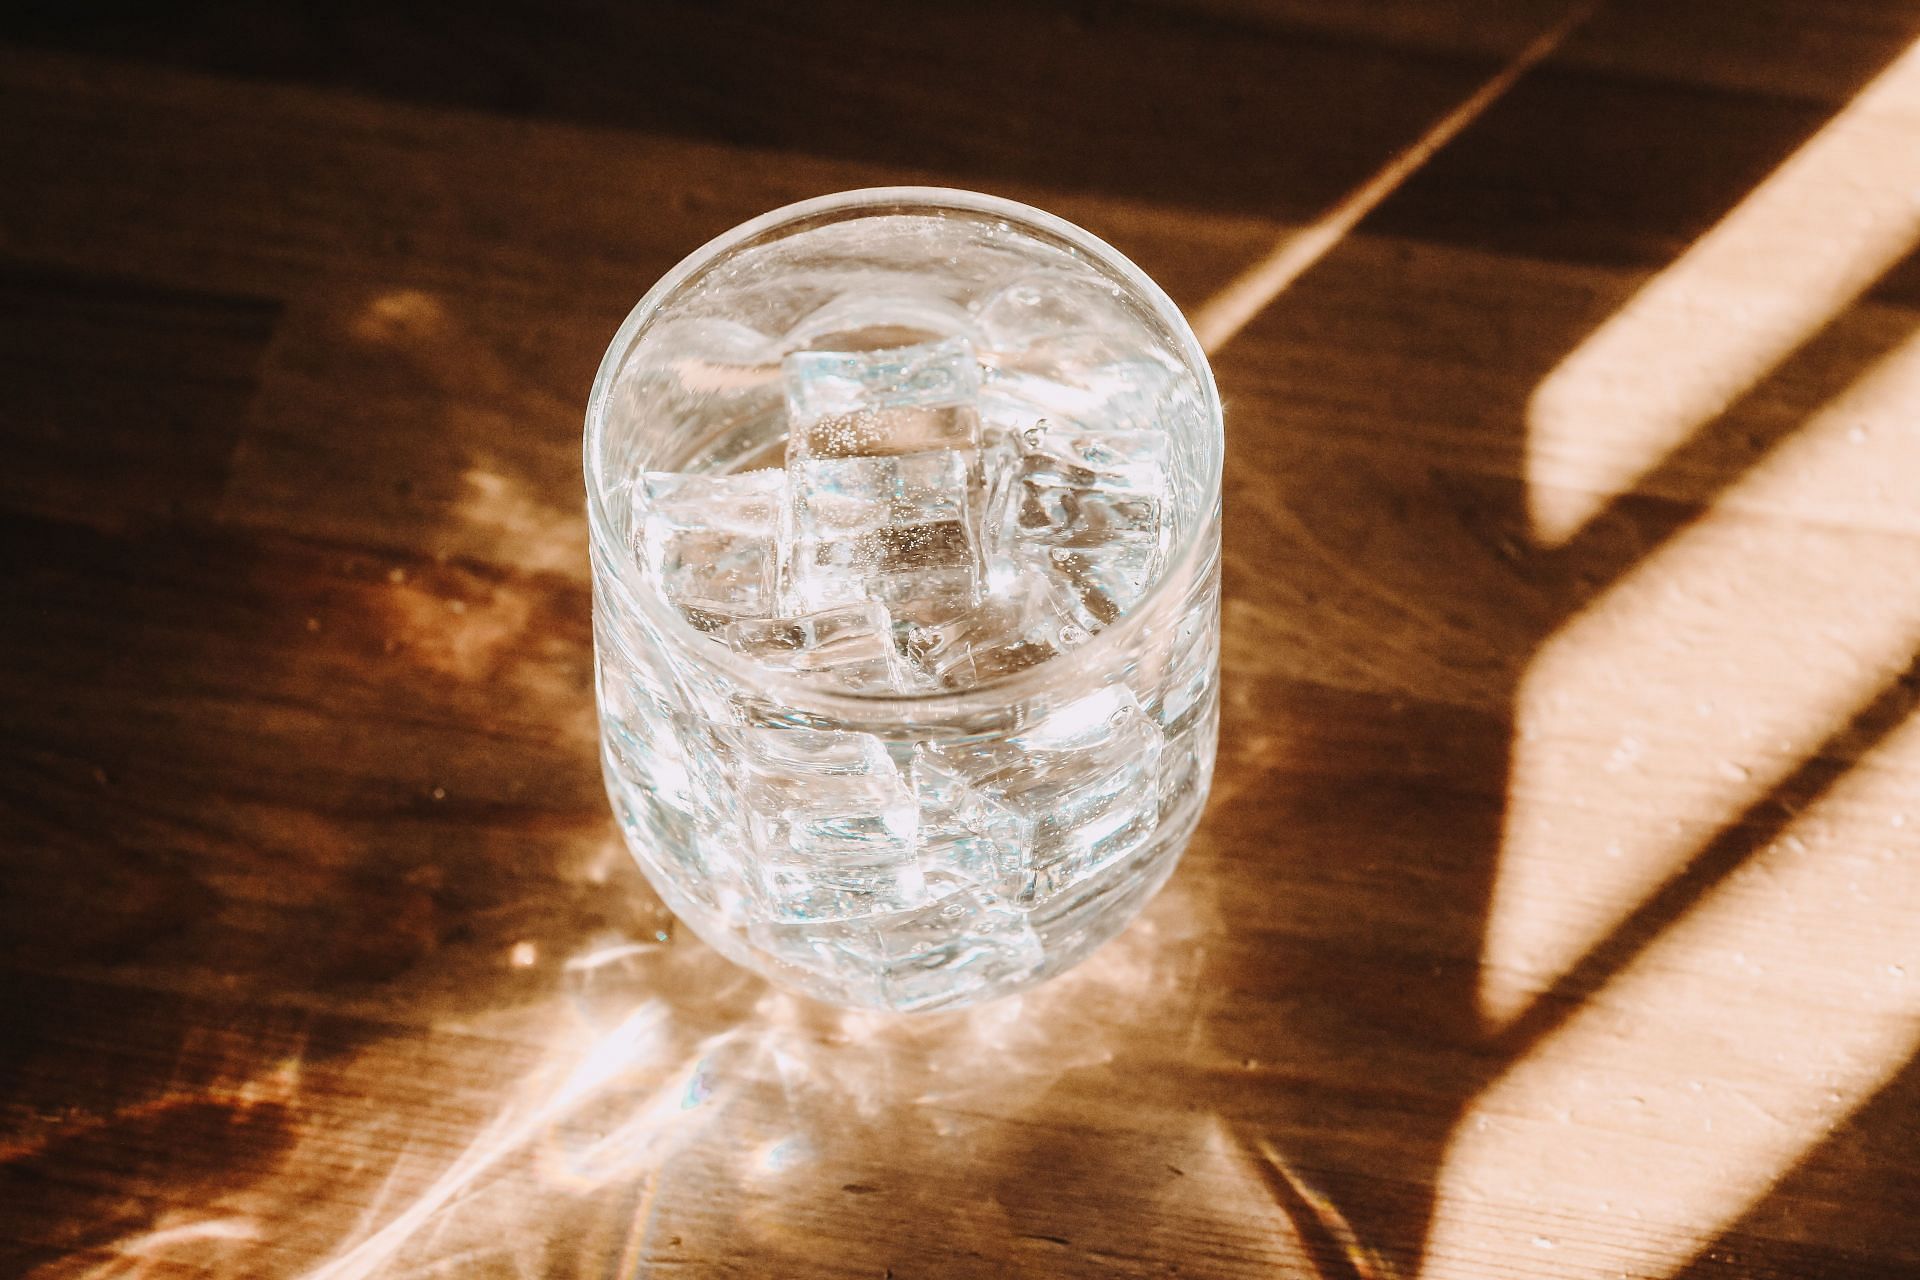 Is sparkling water good for weight loss? (Image via Unsplash/Giorgio Trovato)